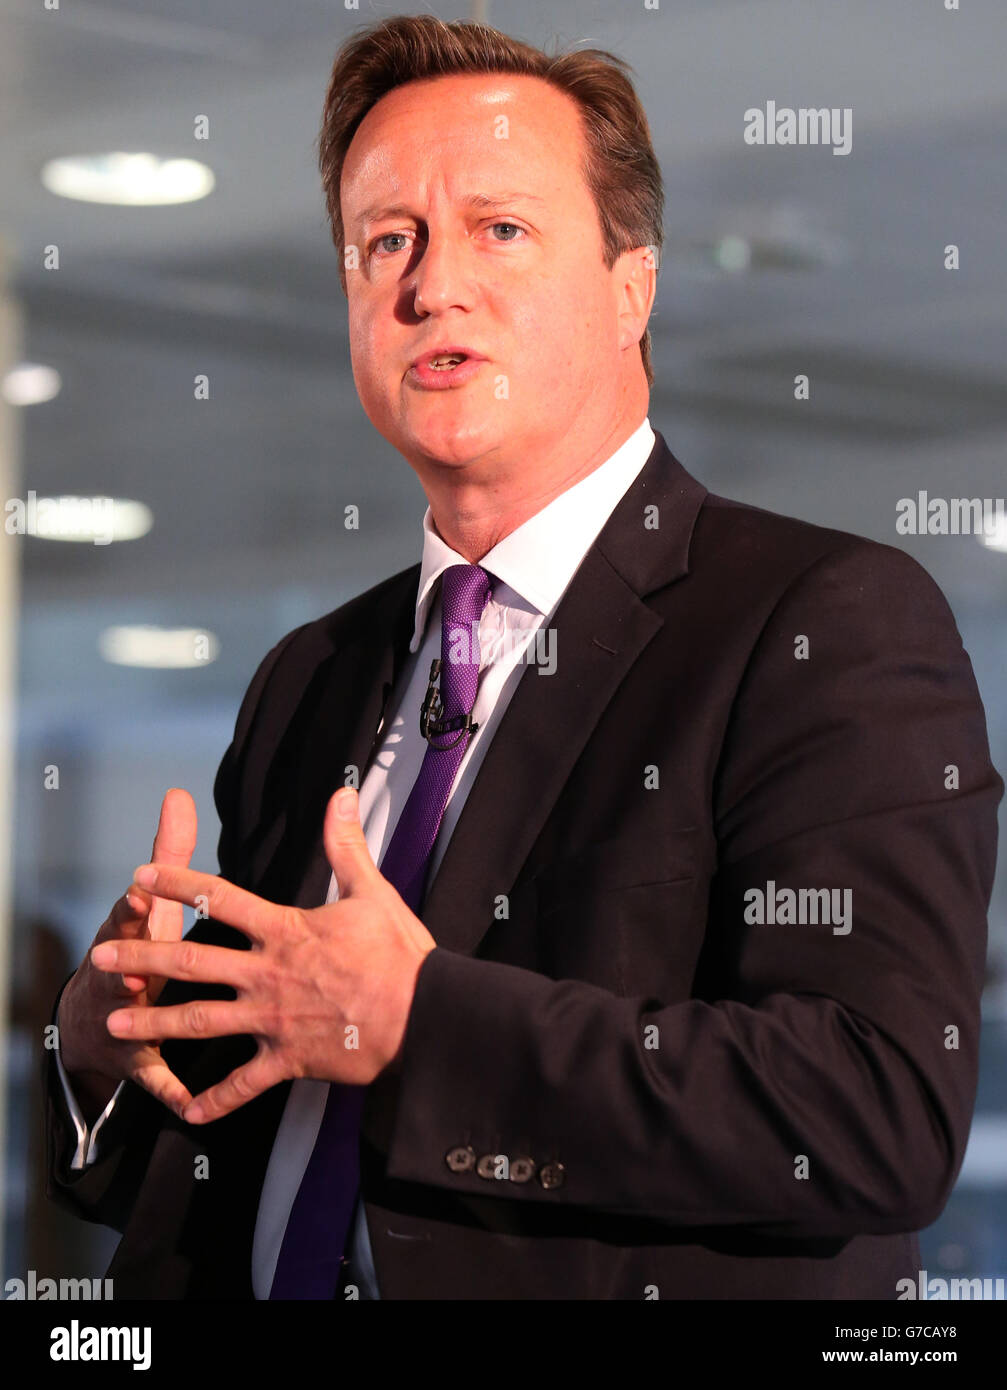 Prime Minister David Cameron speaks during a visit to Scottish Widows offices in Edinburgh, where he made an impassioned plea to keep Scotland part of the union, saying he would be 'heartbroken' if the UK was torn apart. Stock Photo